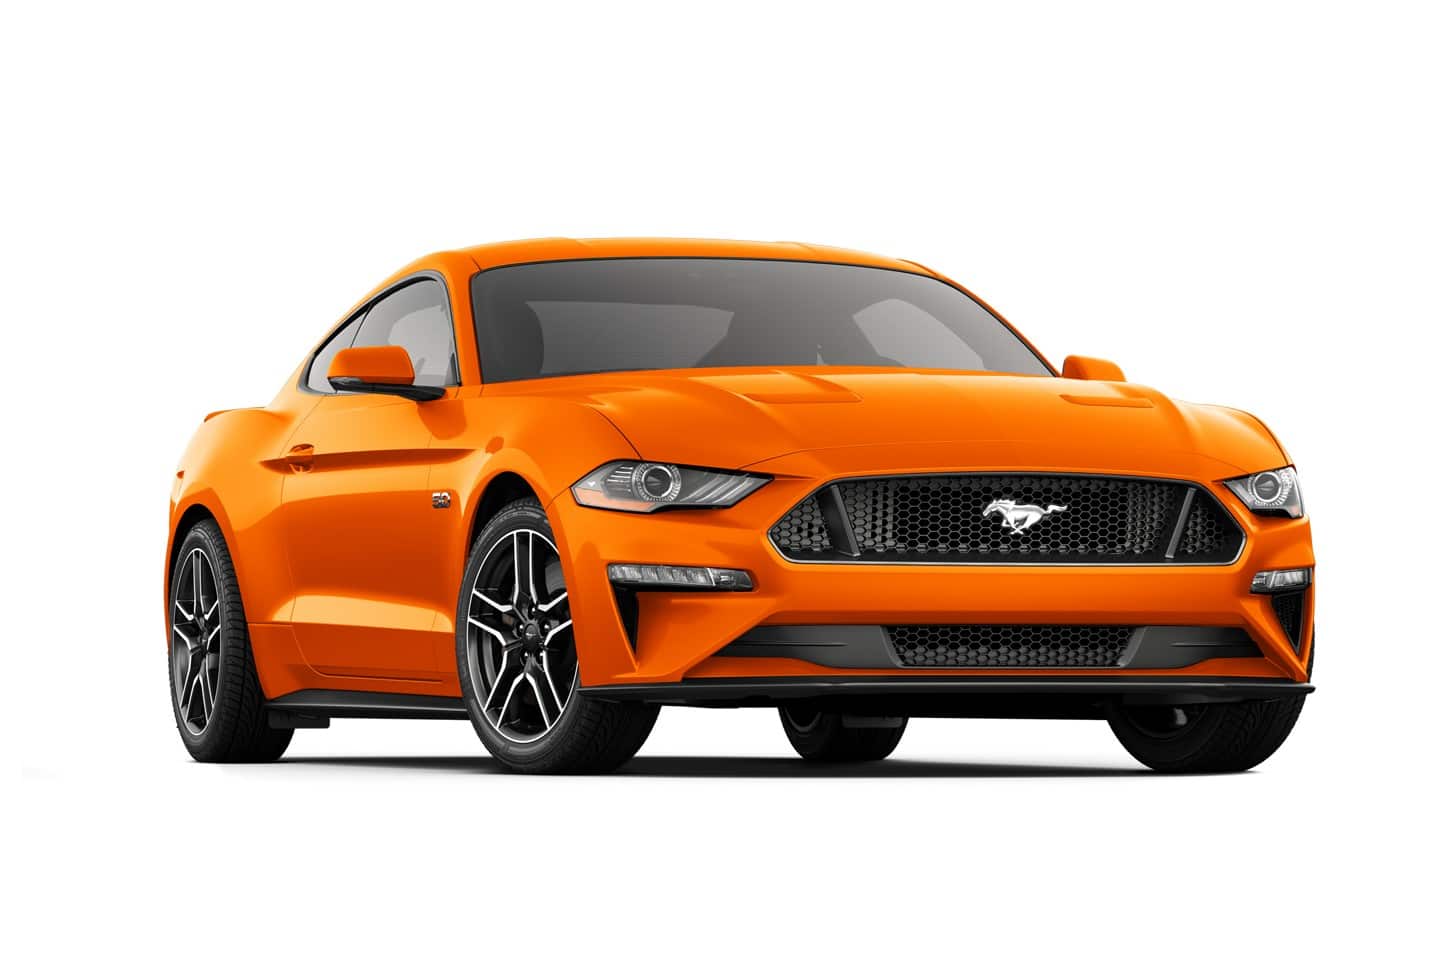 2020 Ford® Mustang GT Premium Fastback Sports Car | Model Details | Ford.com